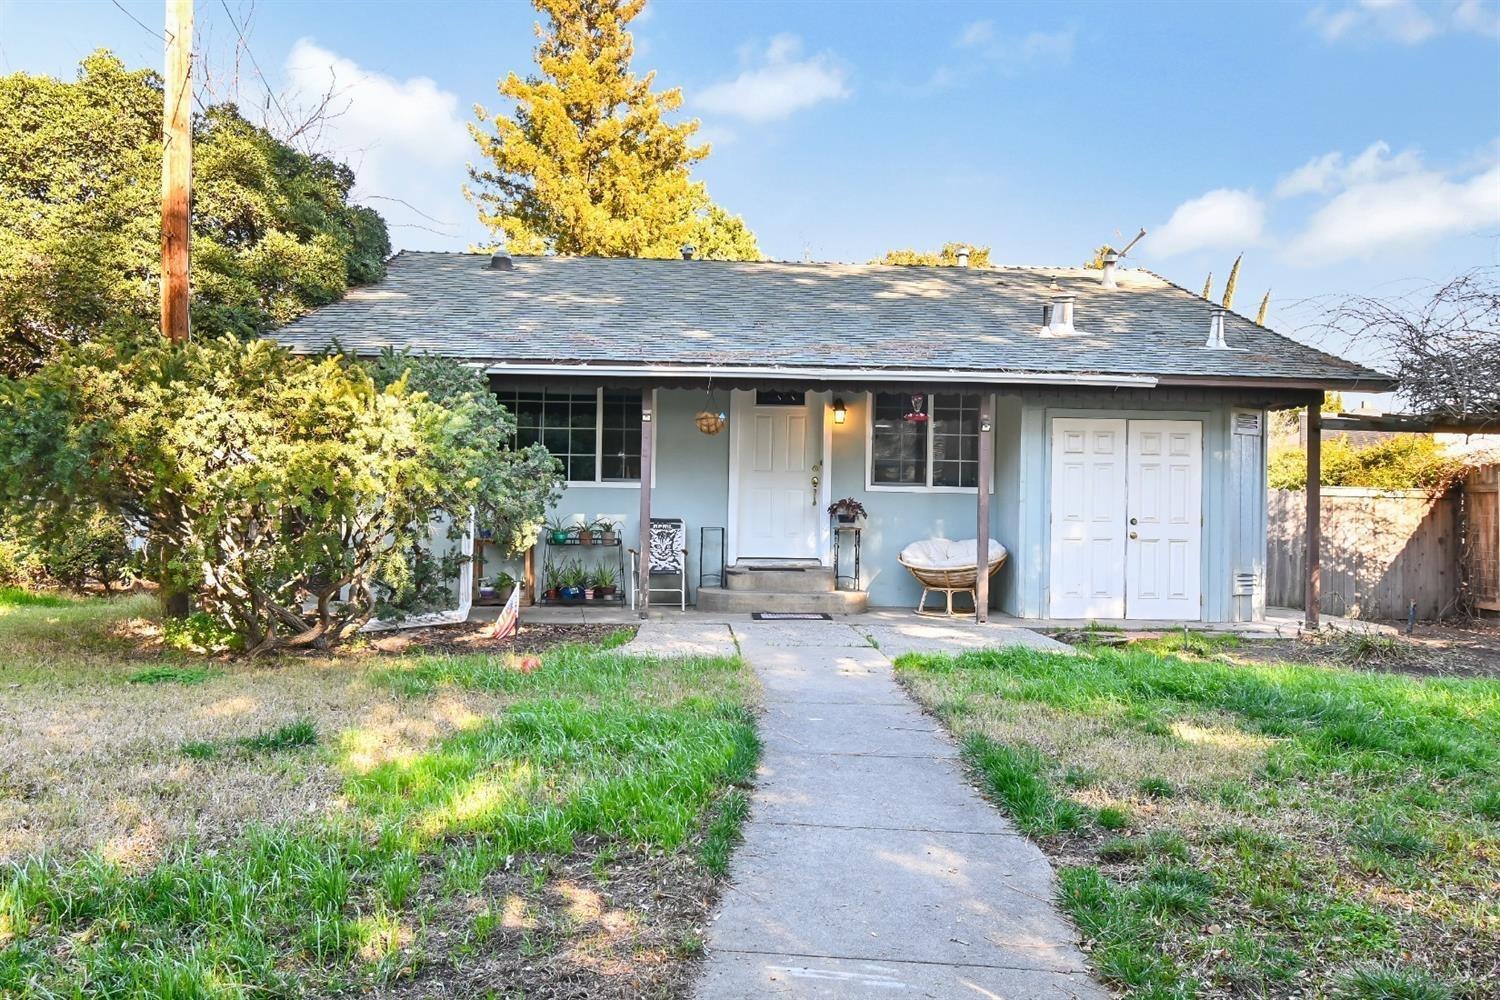 Photo of 16265 Central St in Meridian, CA